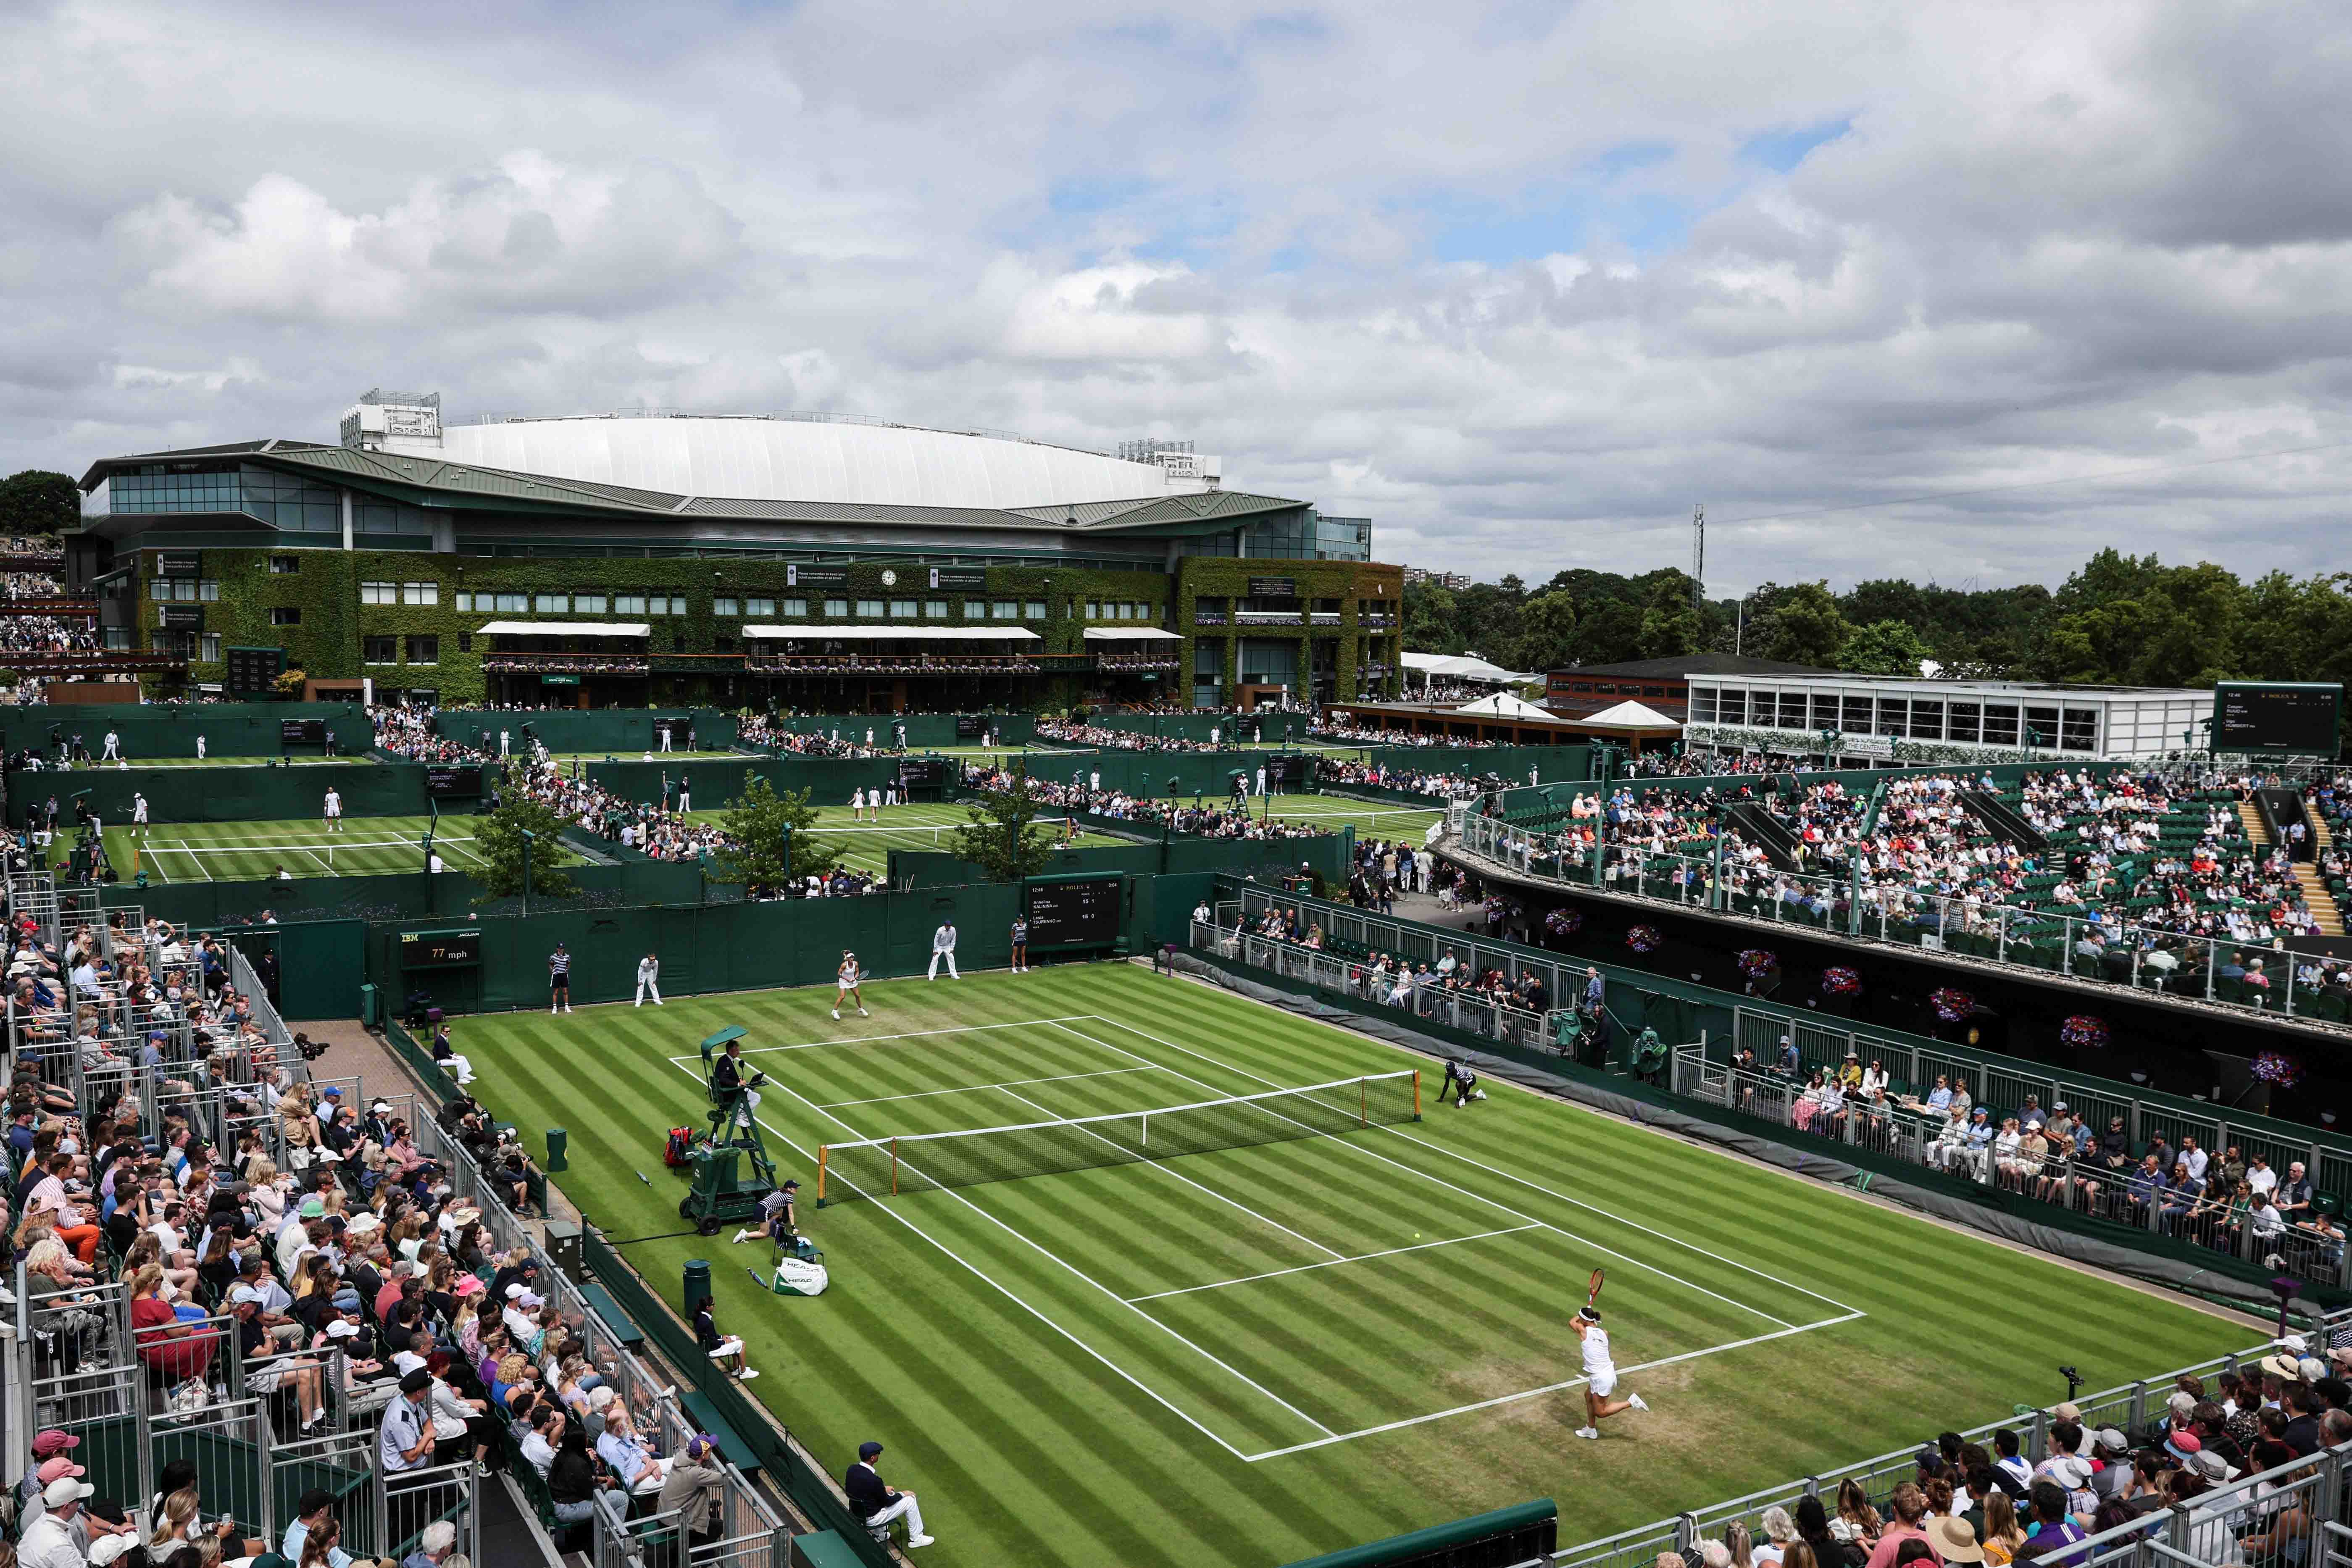 Which British players are playing in Junior Wimbledon 2022? LTA